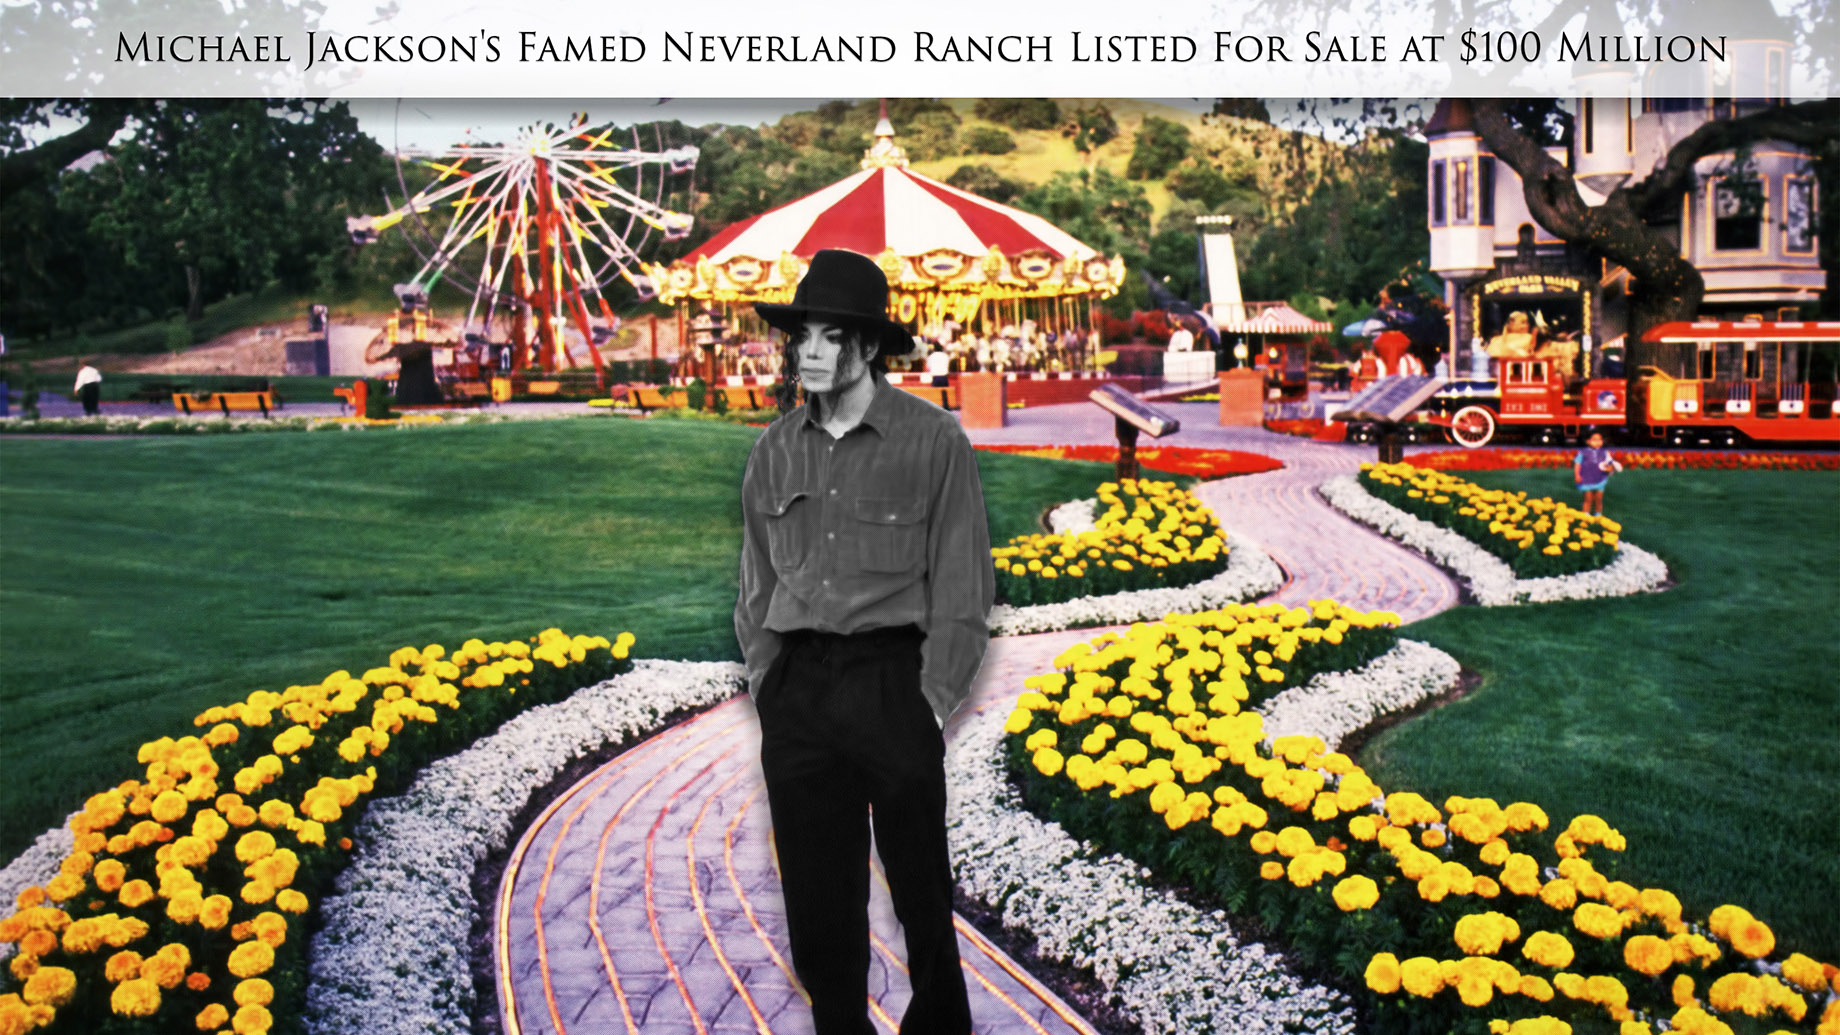 Michael Jackson’s Famed Neverland Valley Ranch Listed For Sale at $100 Million